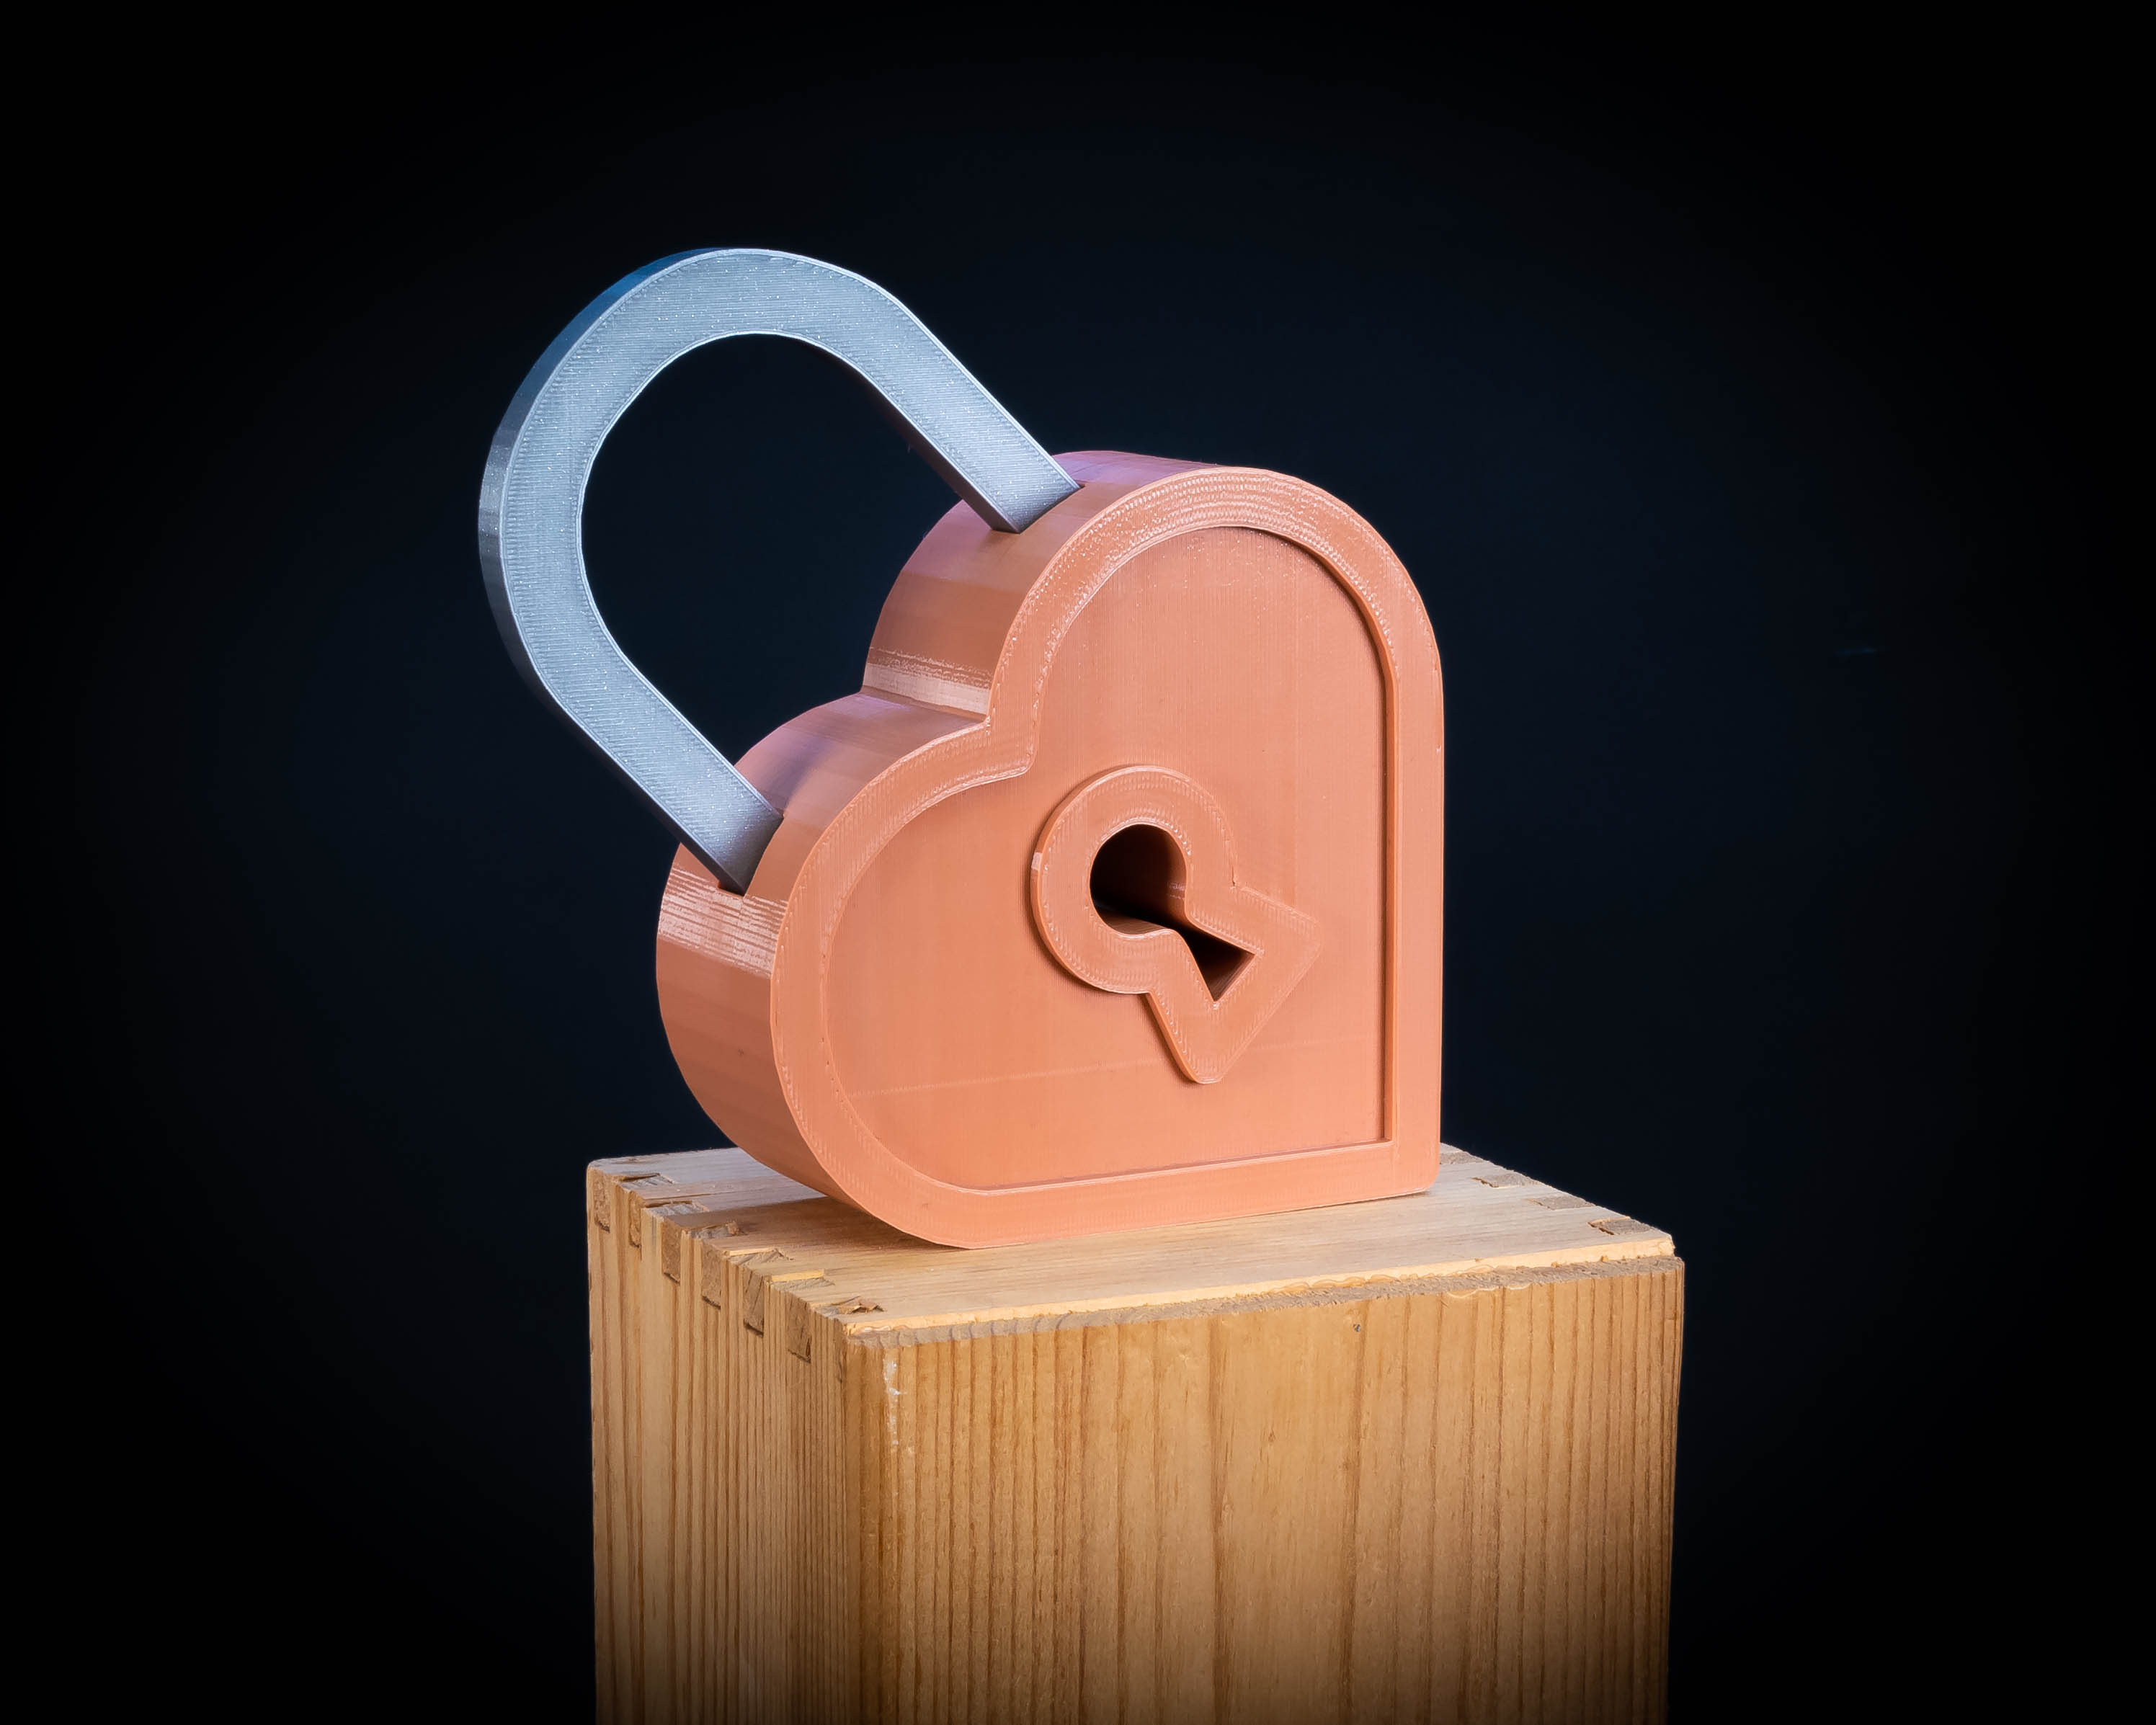 Heart lock (photo booth/party prop)